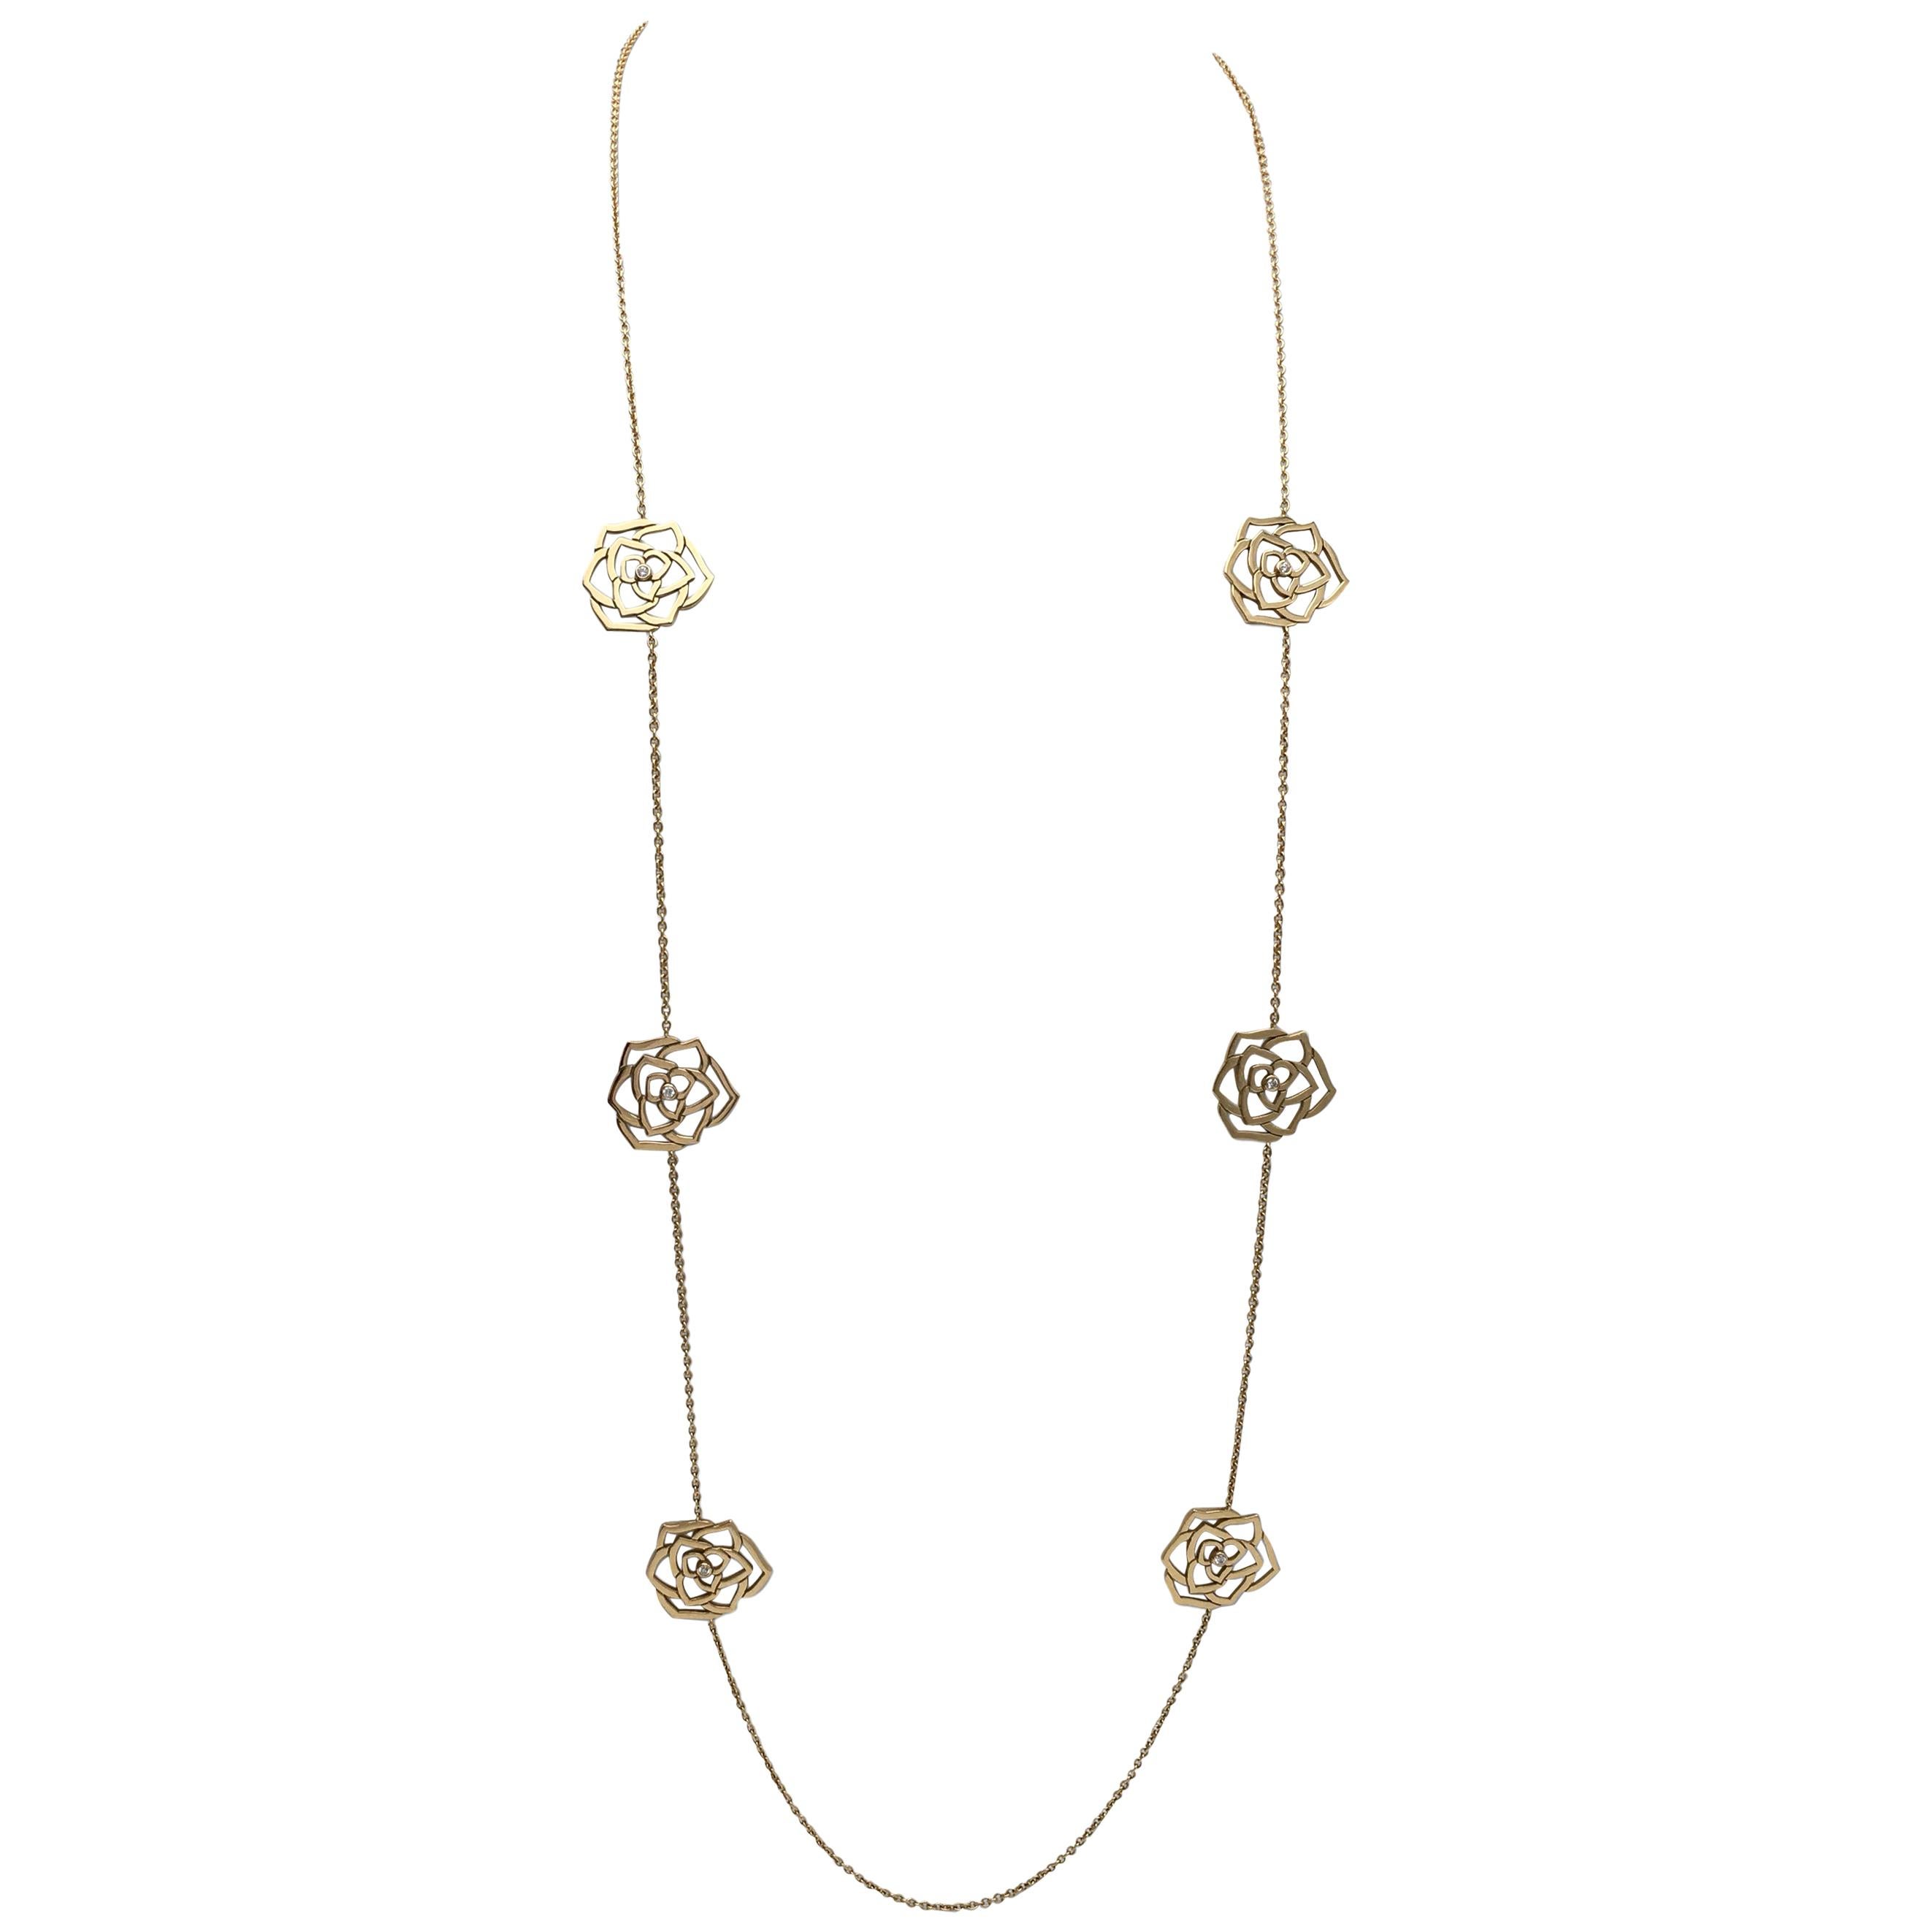 Piaget 'Rose' Rose Gold and Diamond Openwork Long Necklace